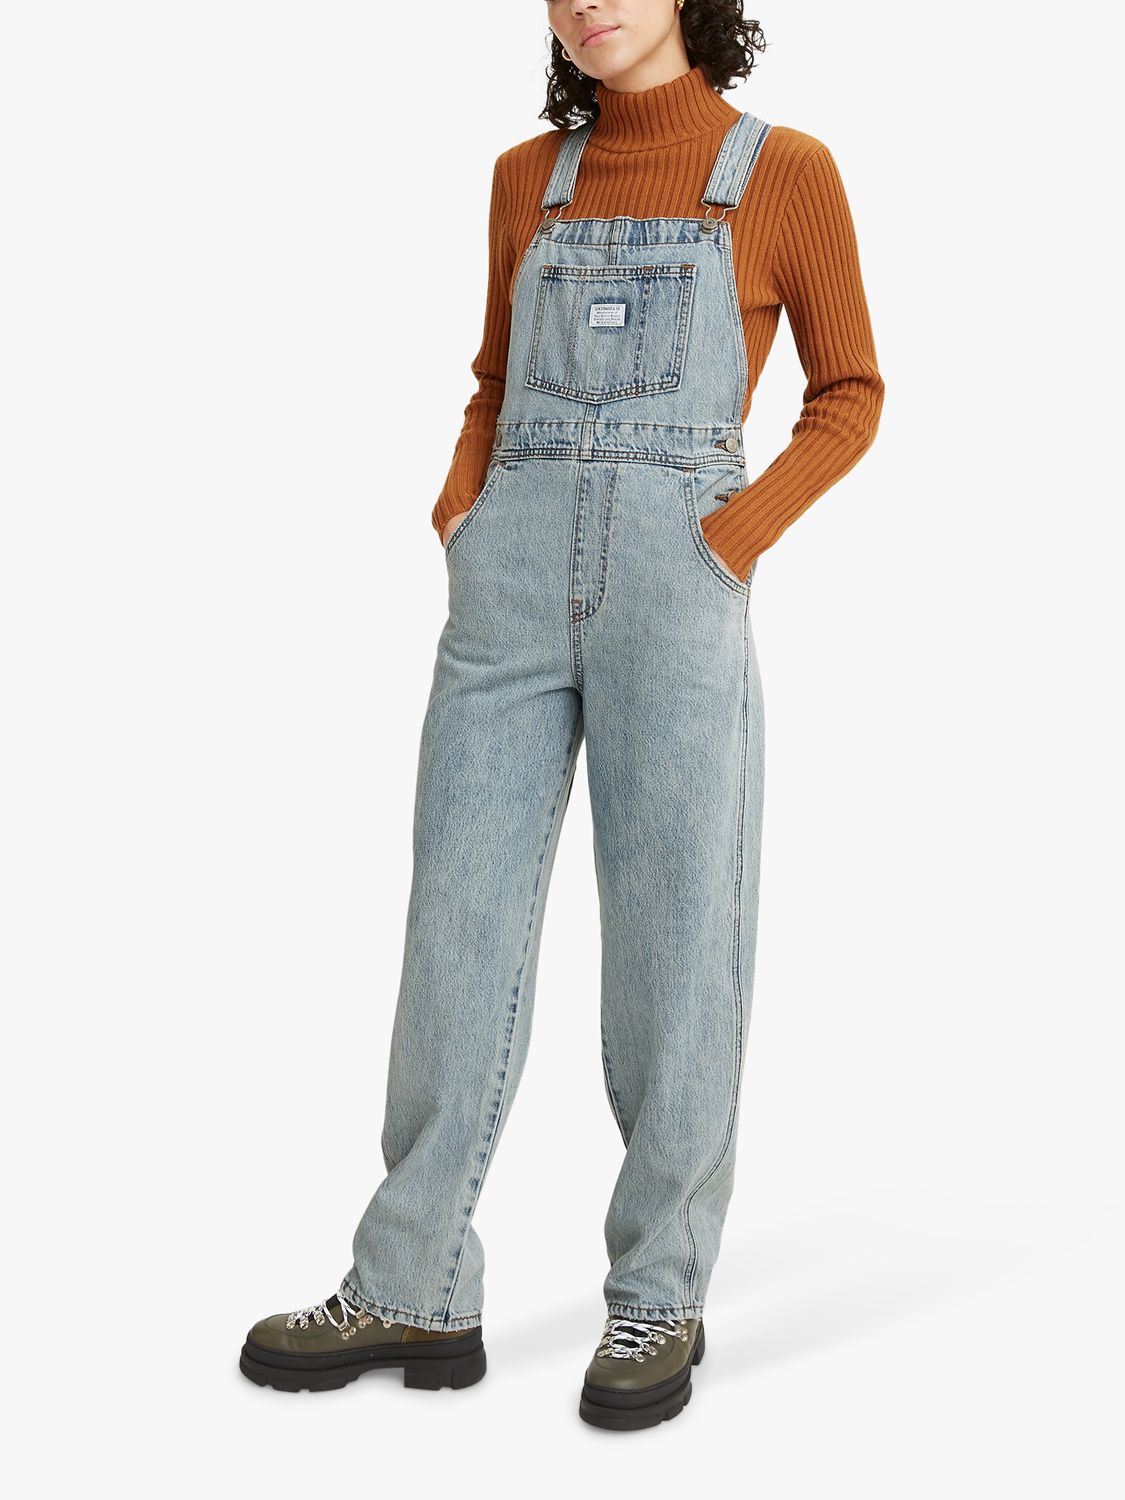 Levi's Vintage Overall Denim Dungarees, No Stone Unturned at John Lewis &  Partners